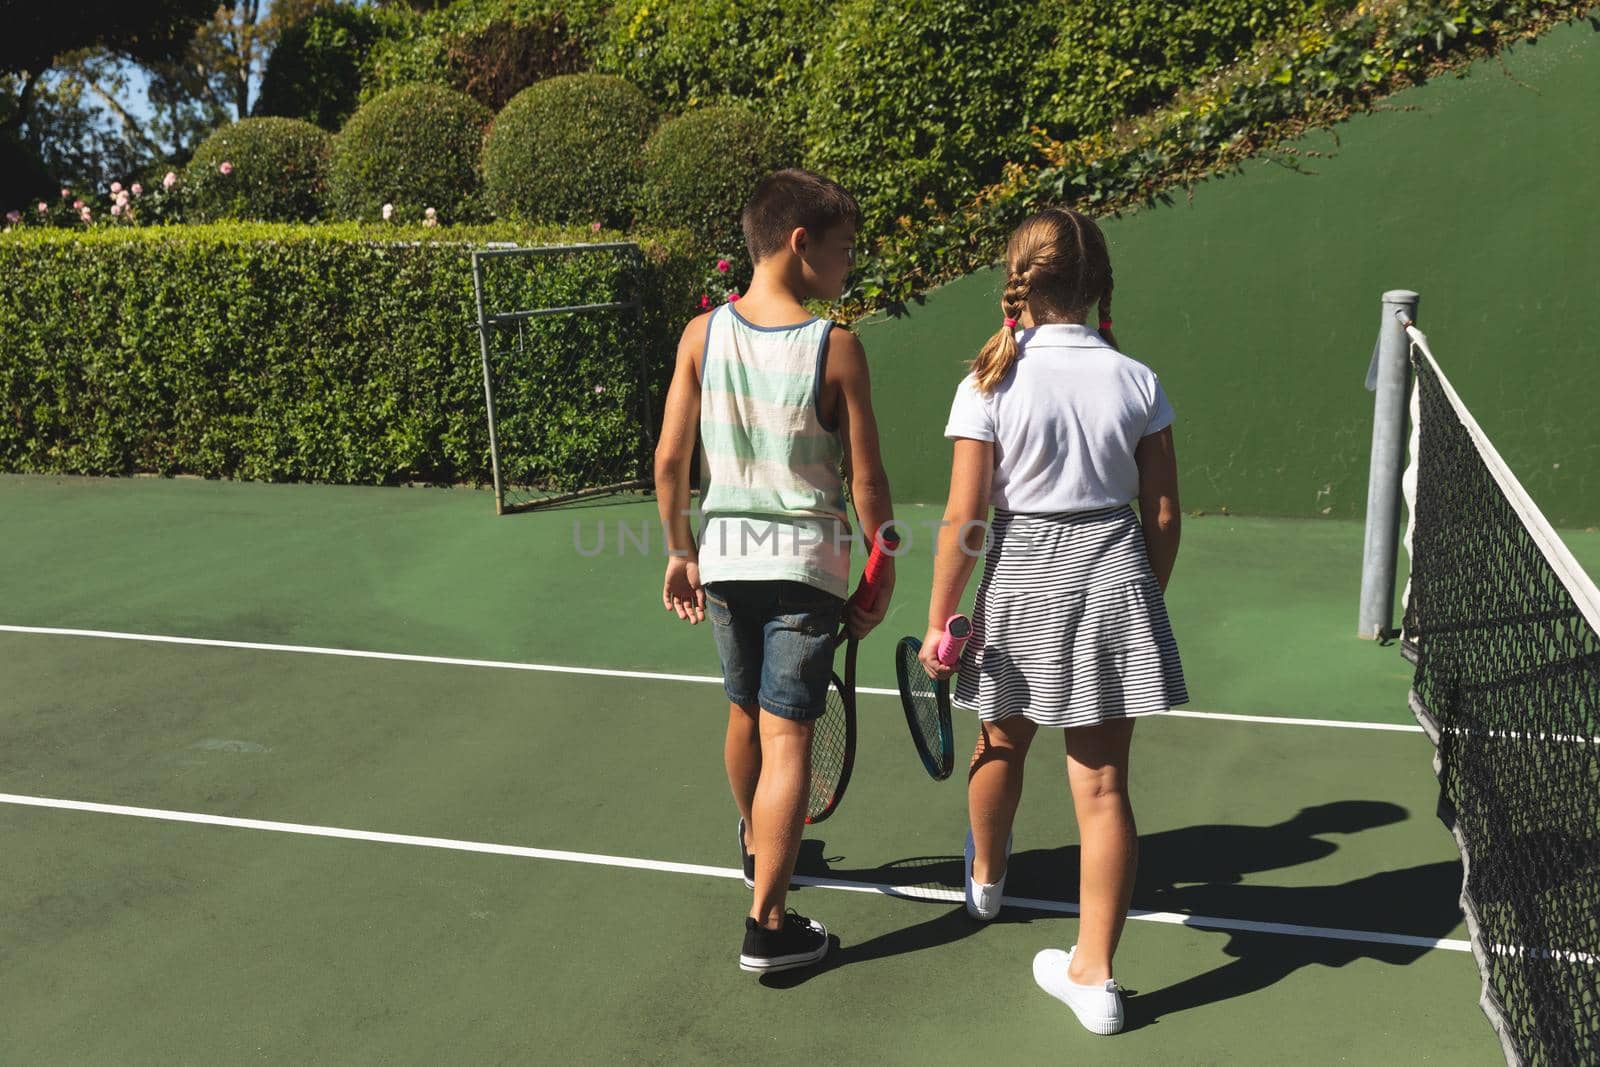 Caucasian boy and girl outdoors, holding tennis rackets and walking on tennis court. family enjoying healthy free time activities together.